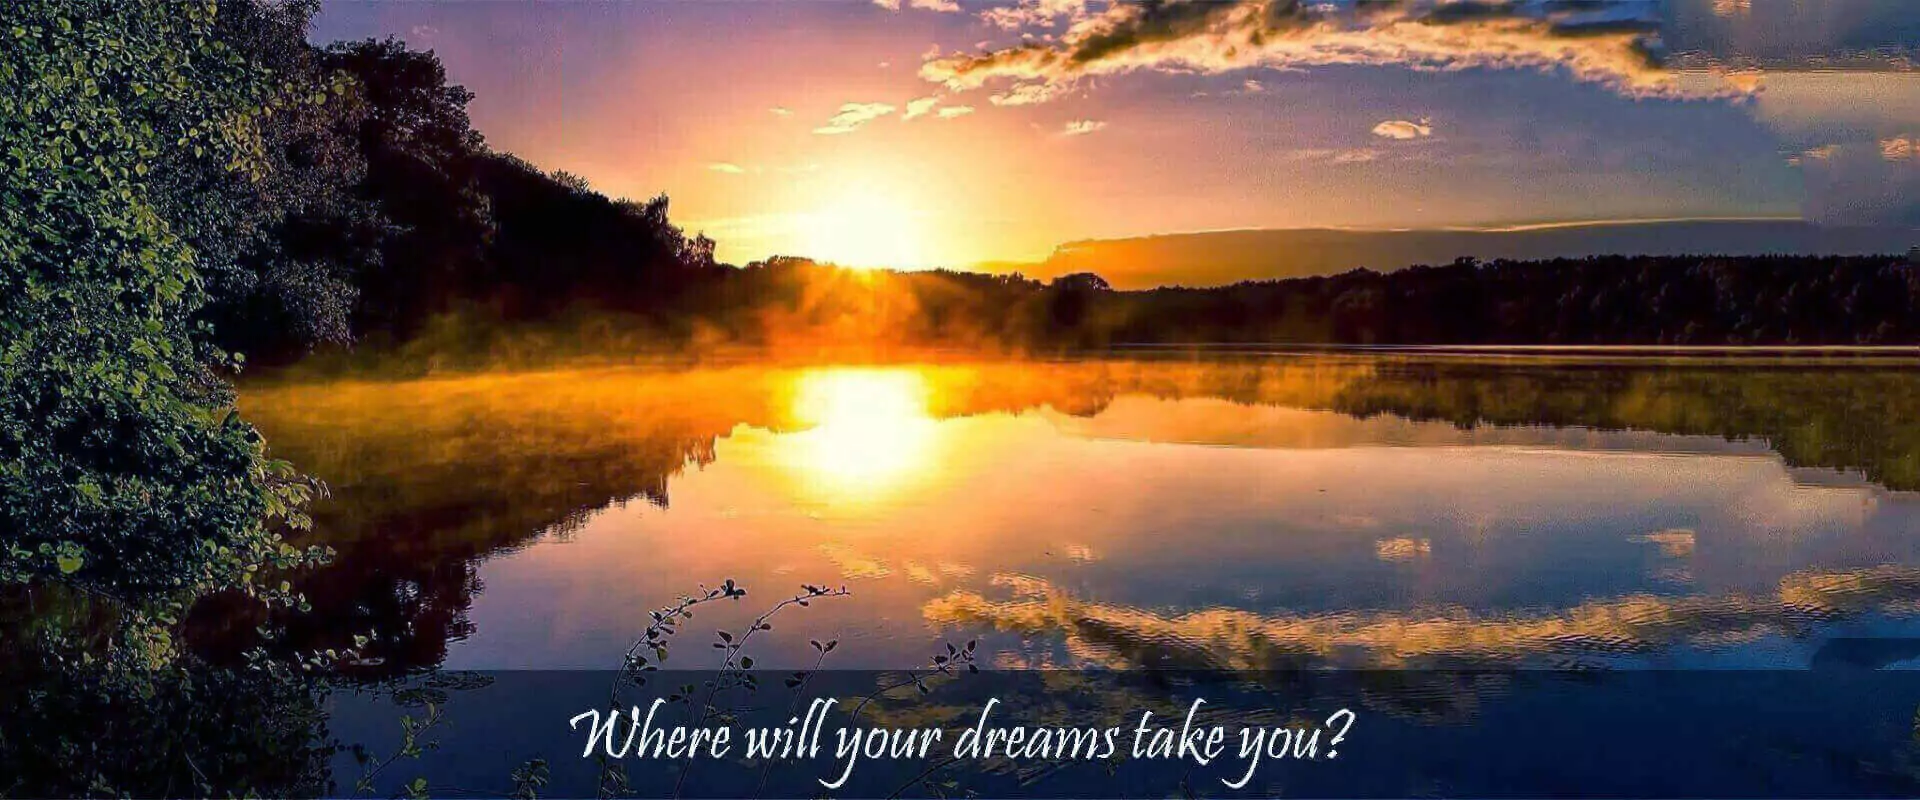 A sunset asking..."Where will your dreams take you?"